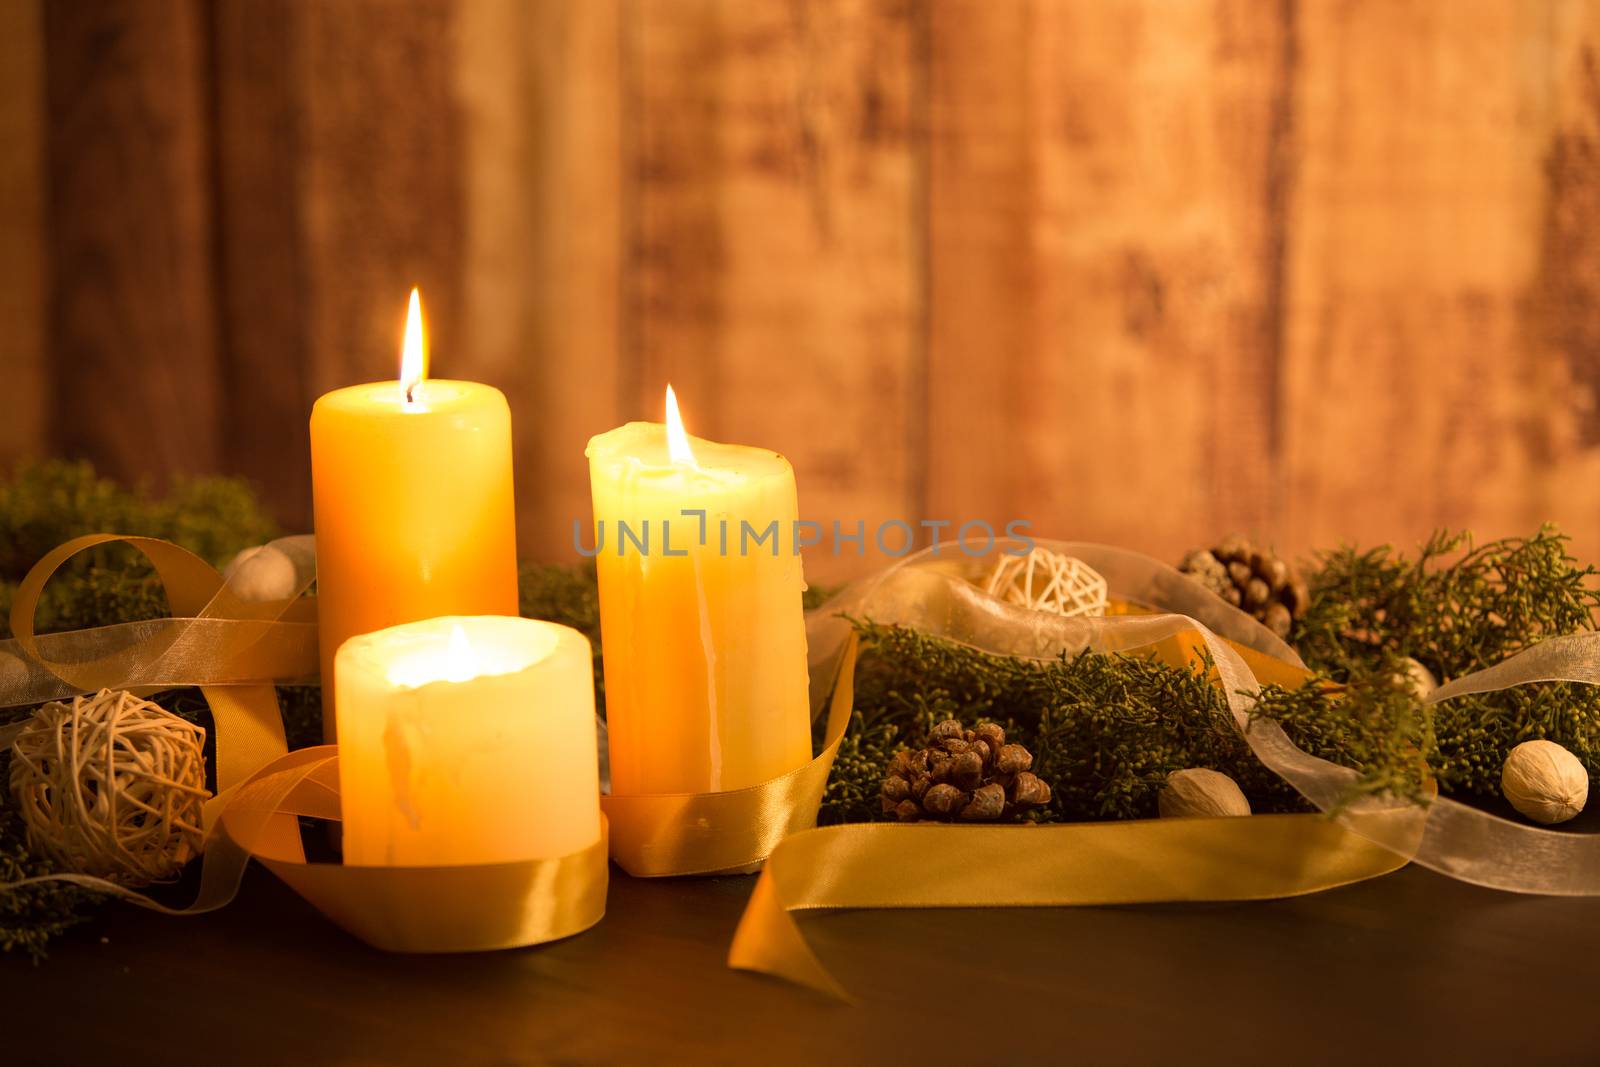 The warmth of the Christmas concept: three candles lit on a dark wooden table and a rustic wooden setting with pine branches, natural pine cones and gold satin and white organza ribbons by robbyfontanesi